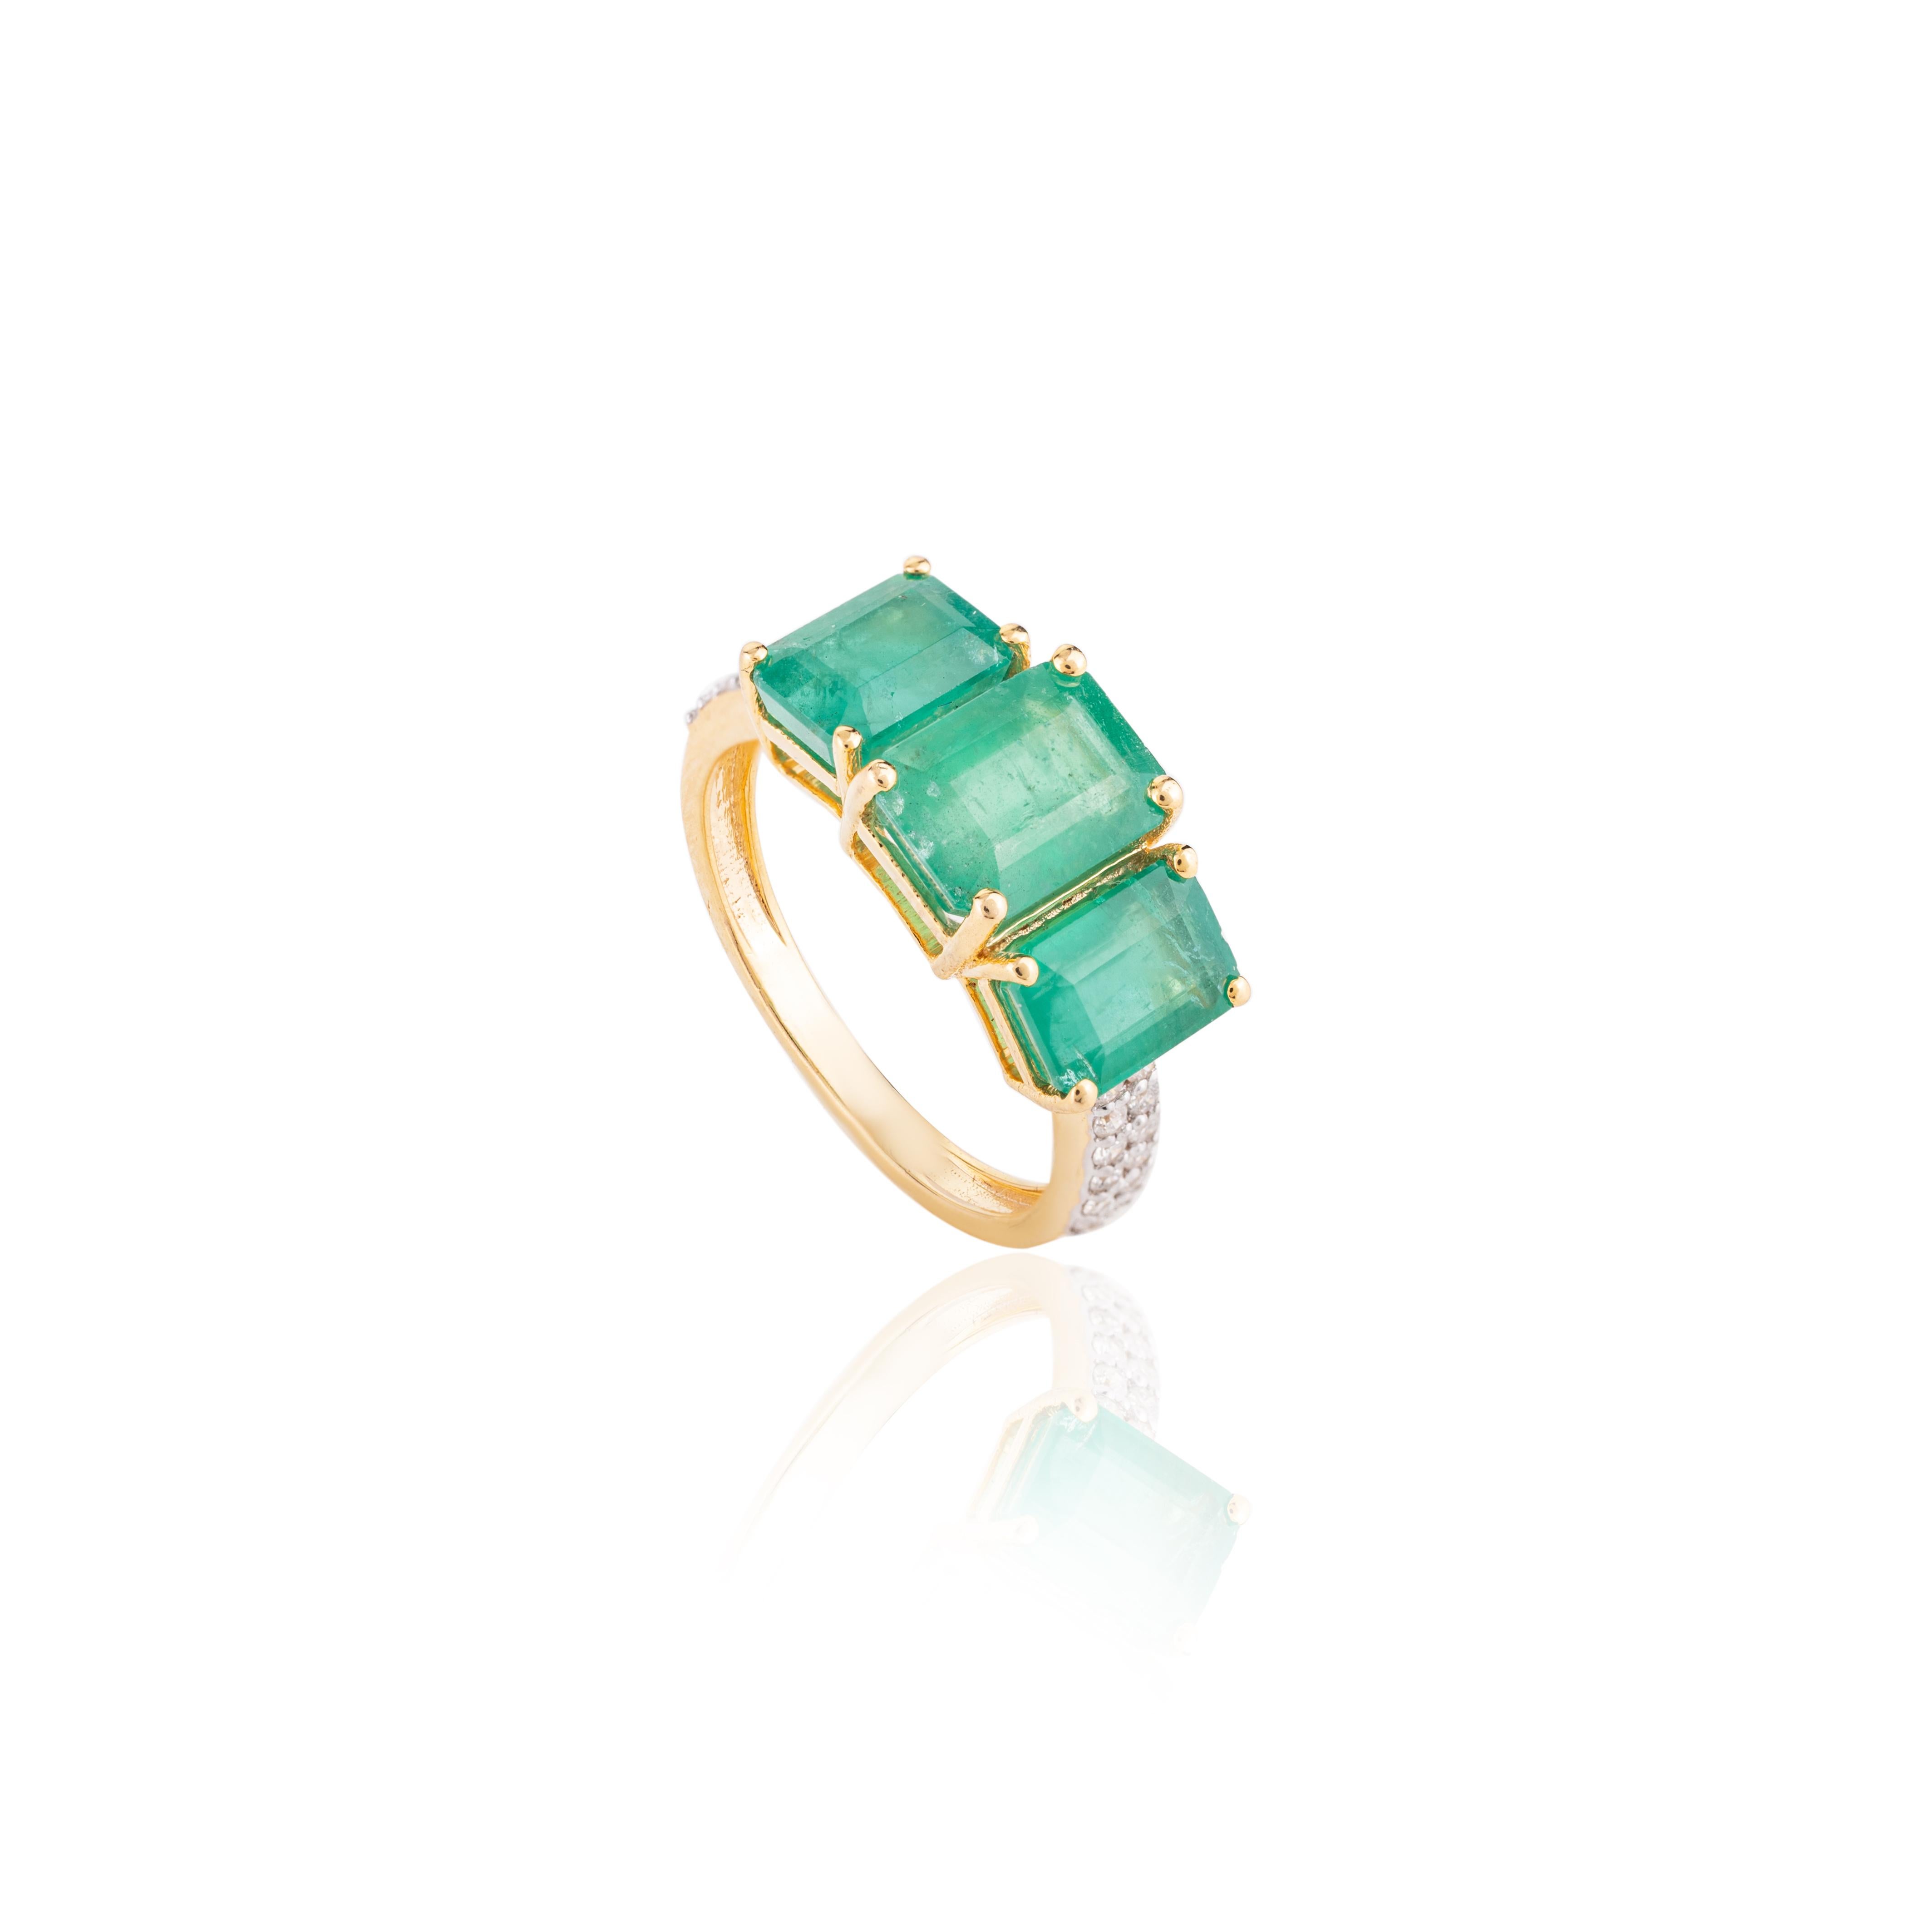 For Sale:  4.14 CTW Three Stone Genuine Emerald Ring with Diamonds in 18k Yellow Gold  7